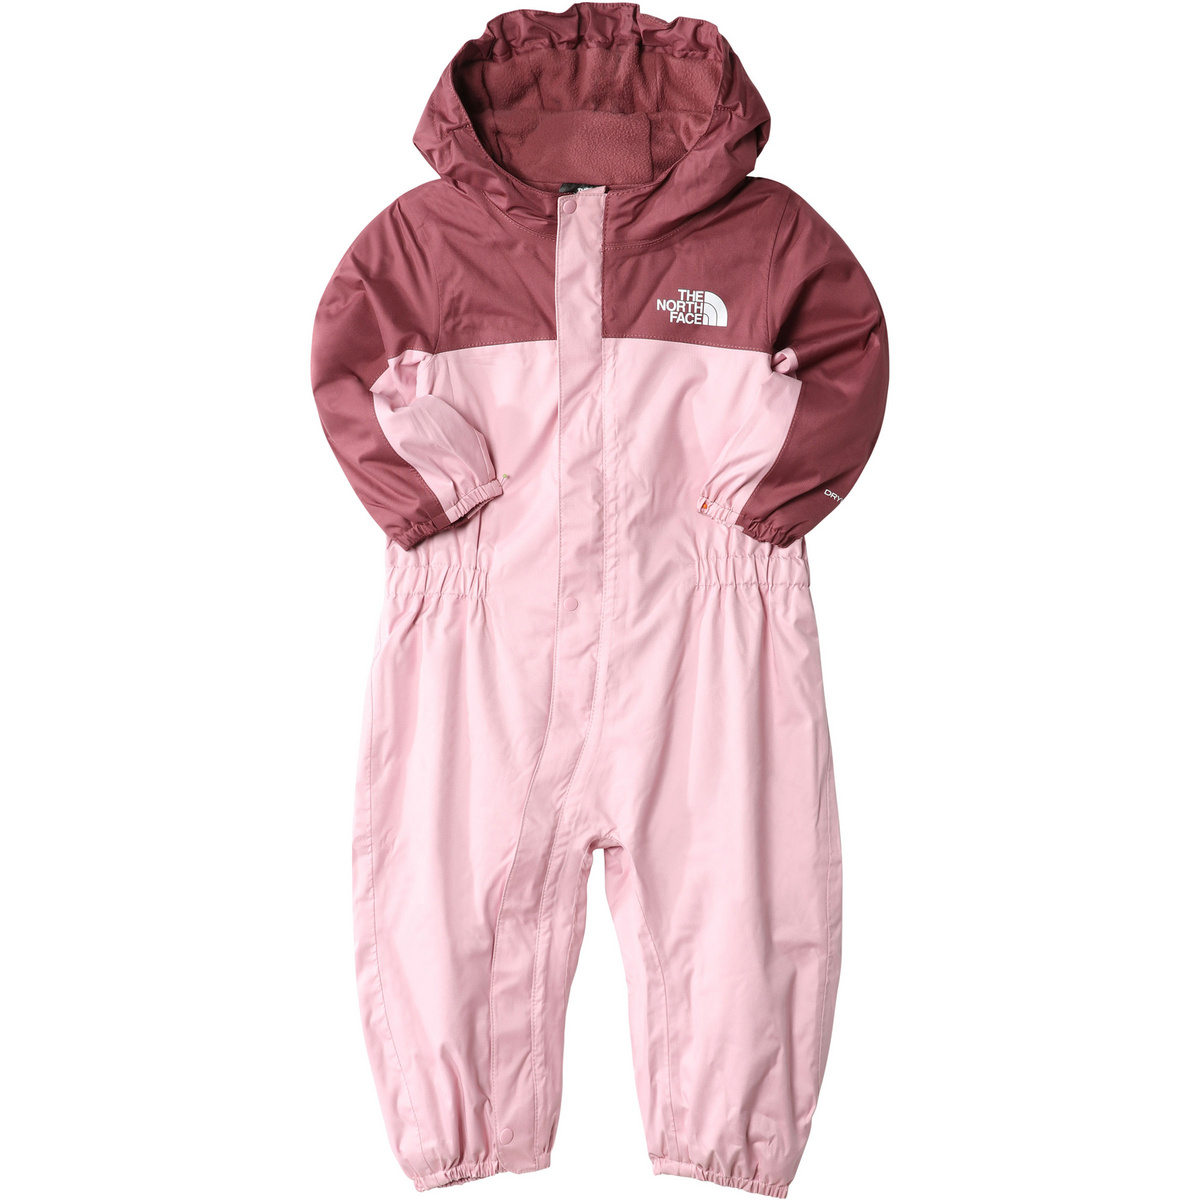 The North Face Kinder Baby Rain Winter One Piece von The North Face